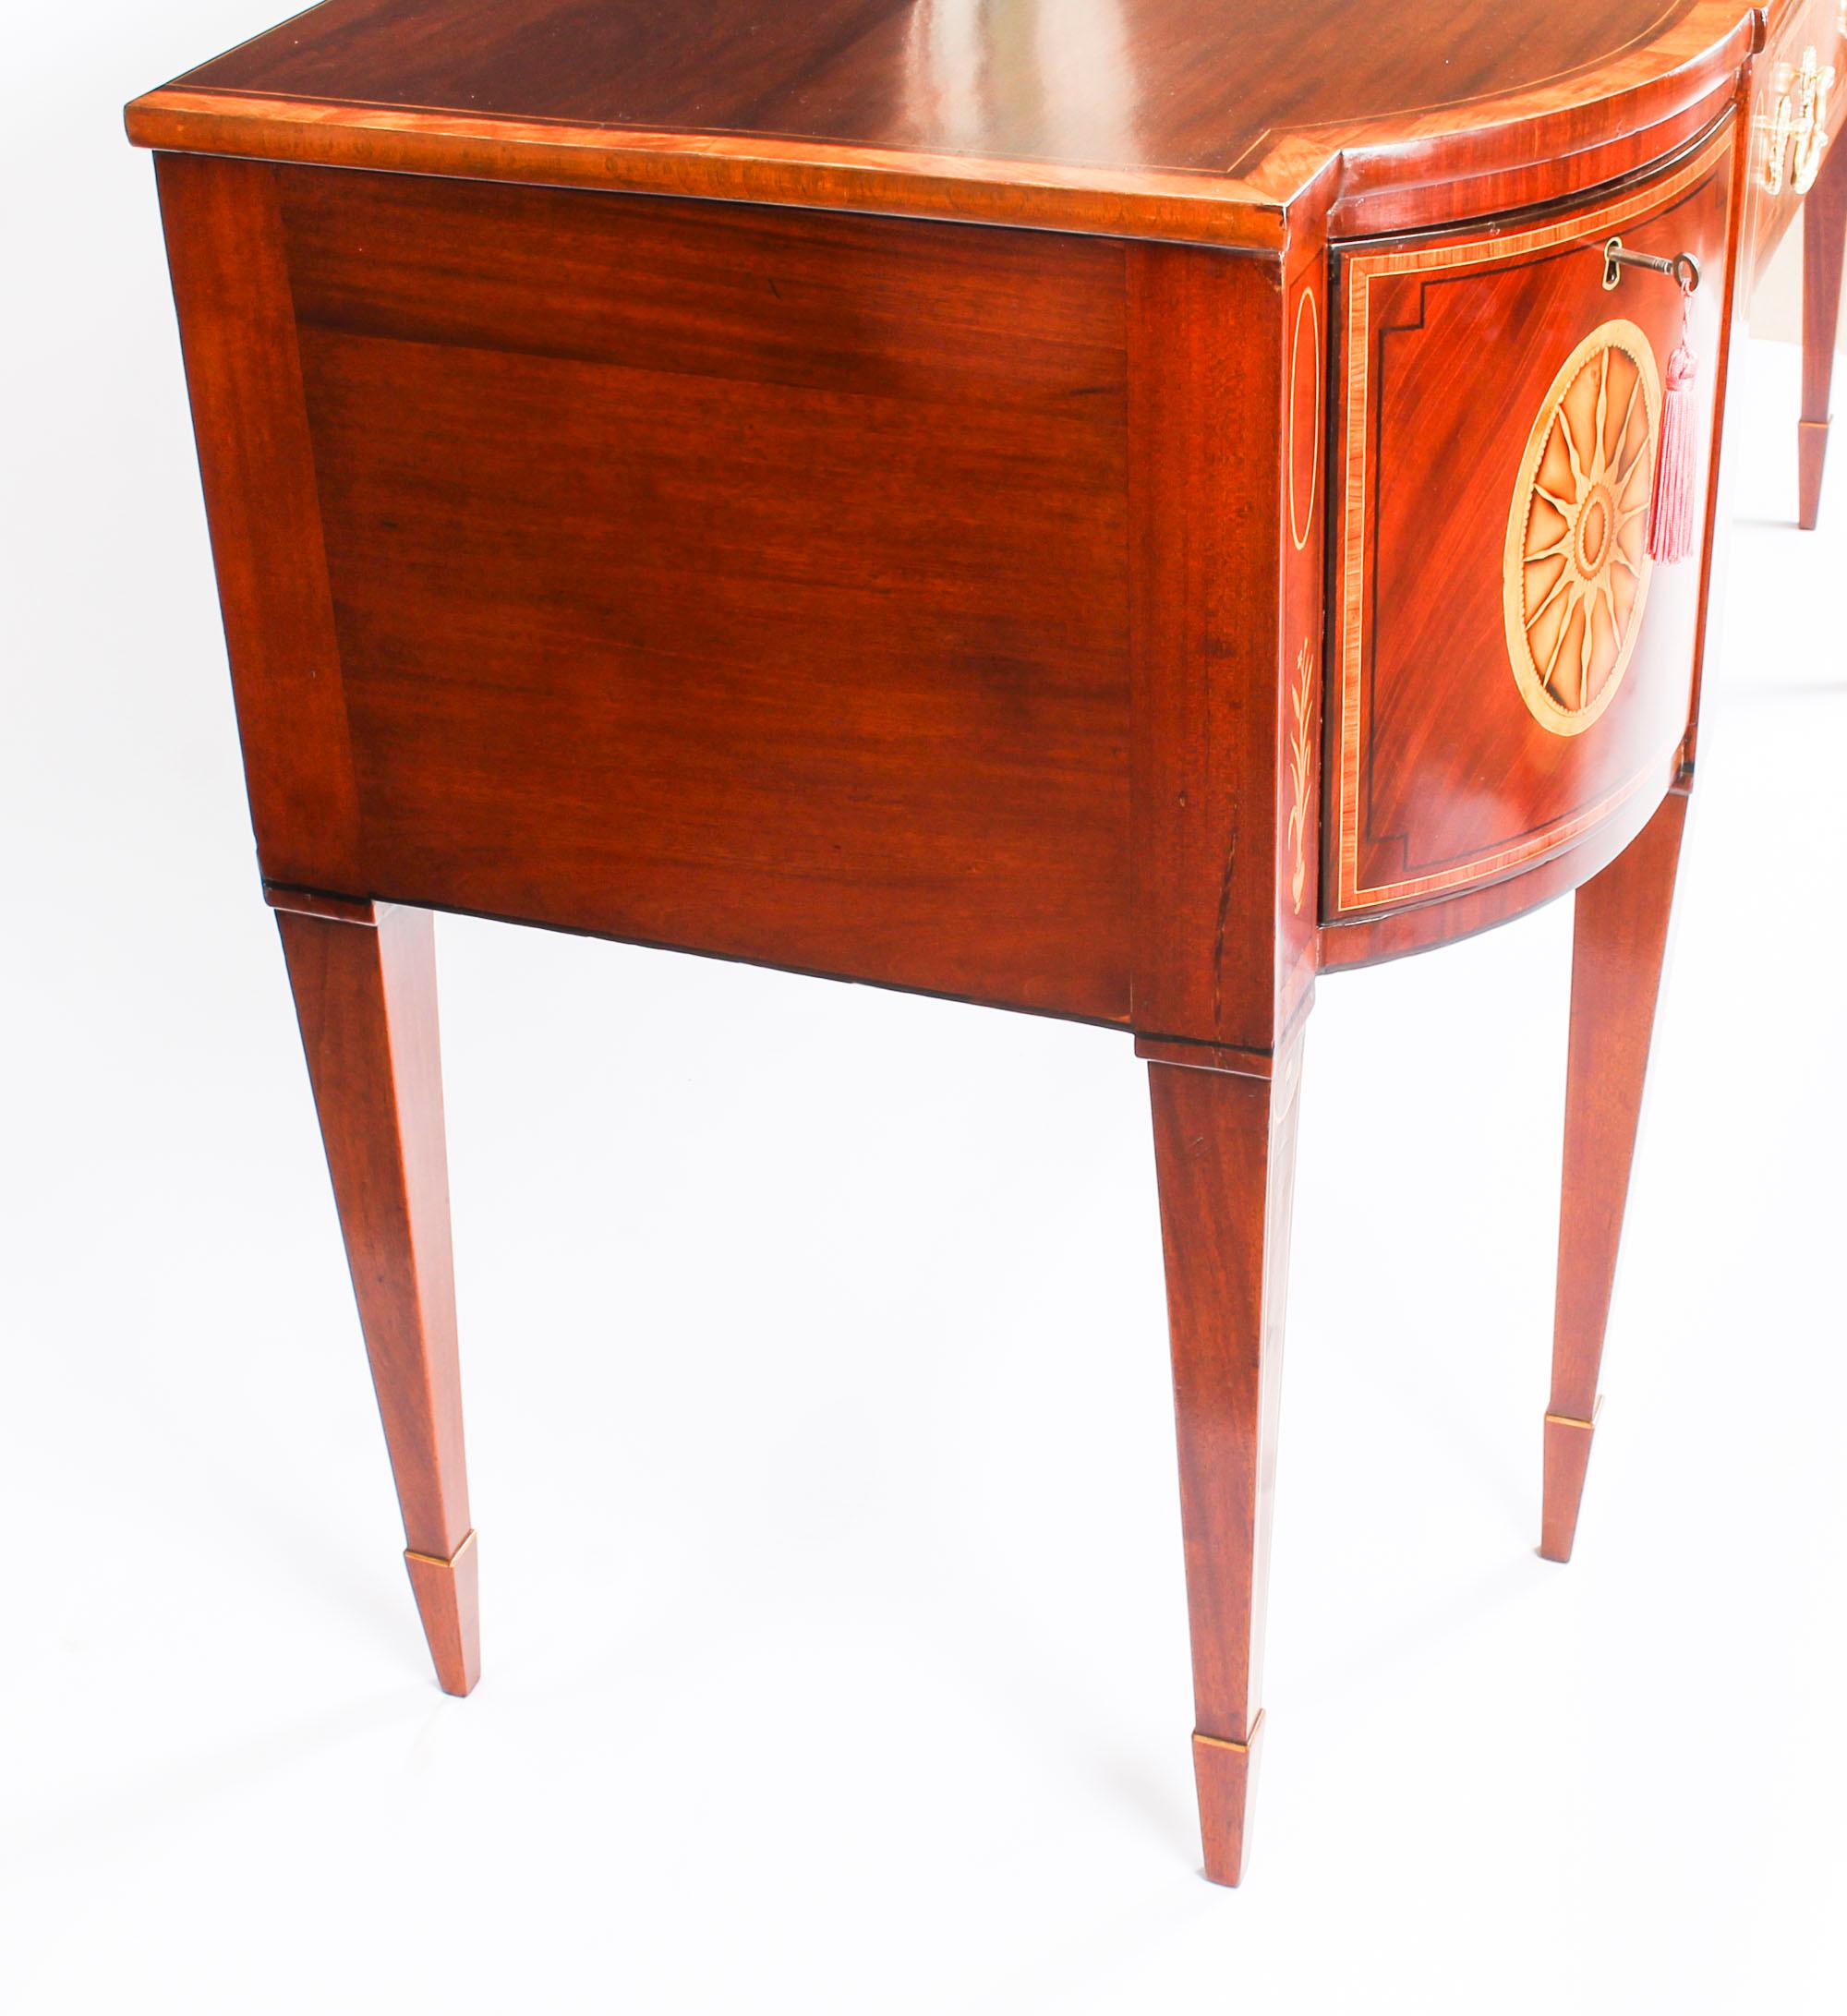 Antique Regency Flame Mahogany and Satinwood Inlaid Sideboard, 19th Century 7